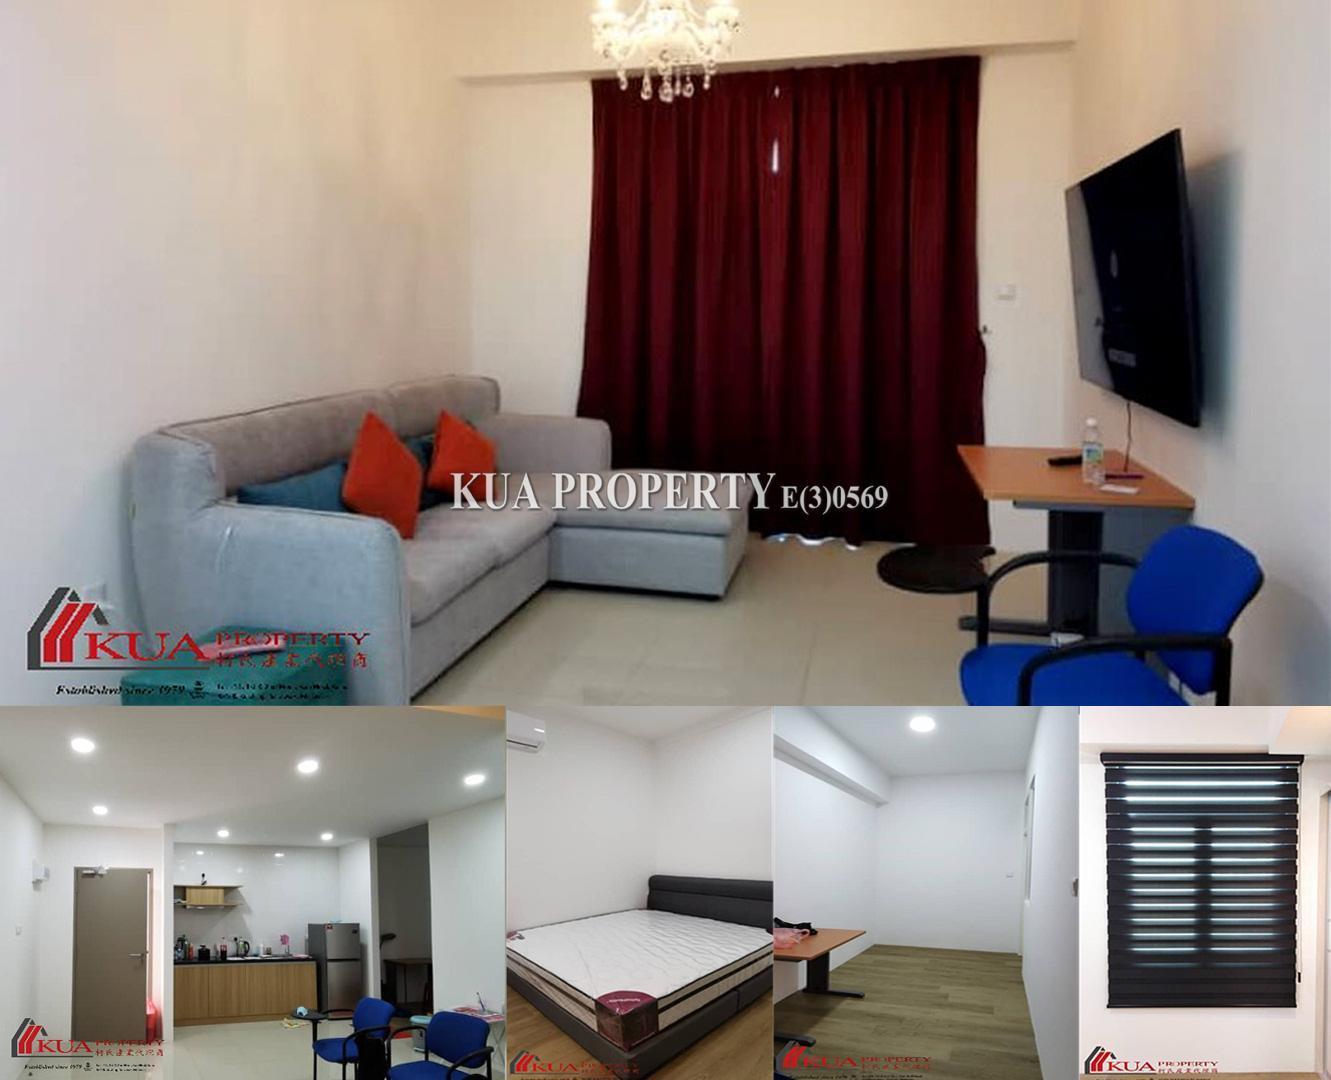 Laticube Apartment For Rent and For Sale! at 3rd Mile, Everbright Park